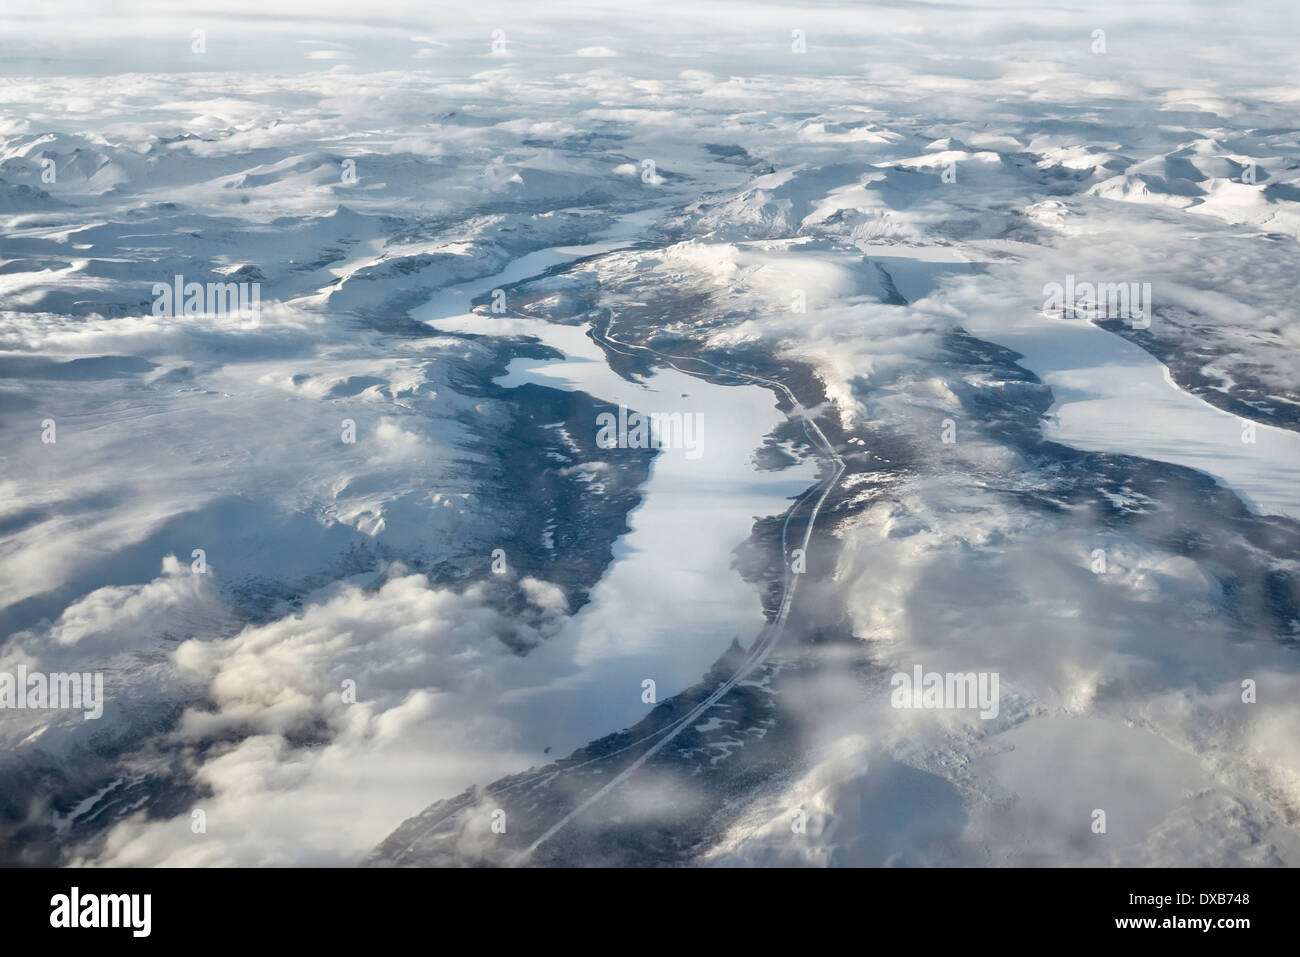 Majestic aerial view of frozen Northern Sweden. High mountain ranges and frozen rivers and lakes with low clouds. Stock Photo